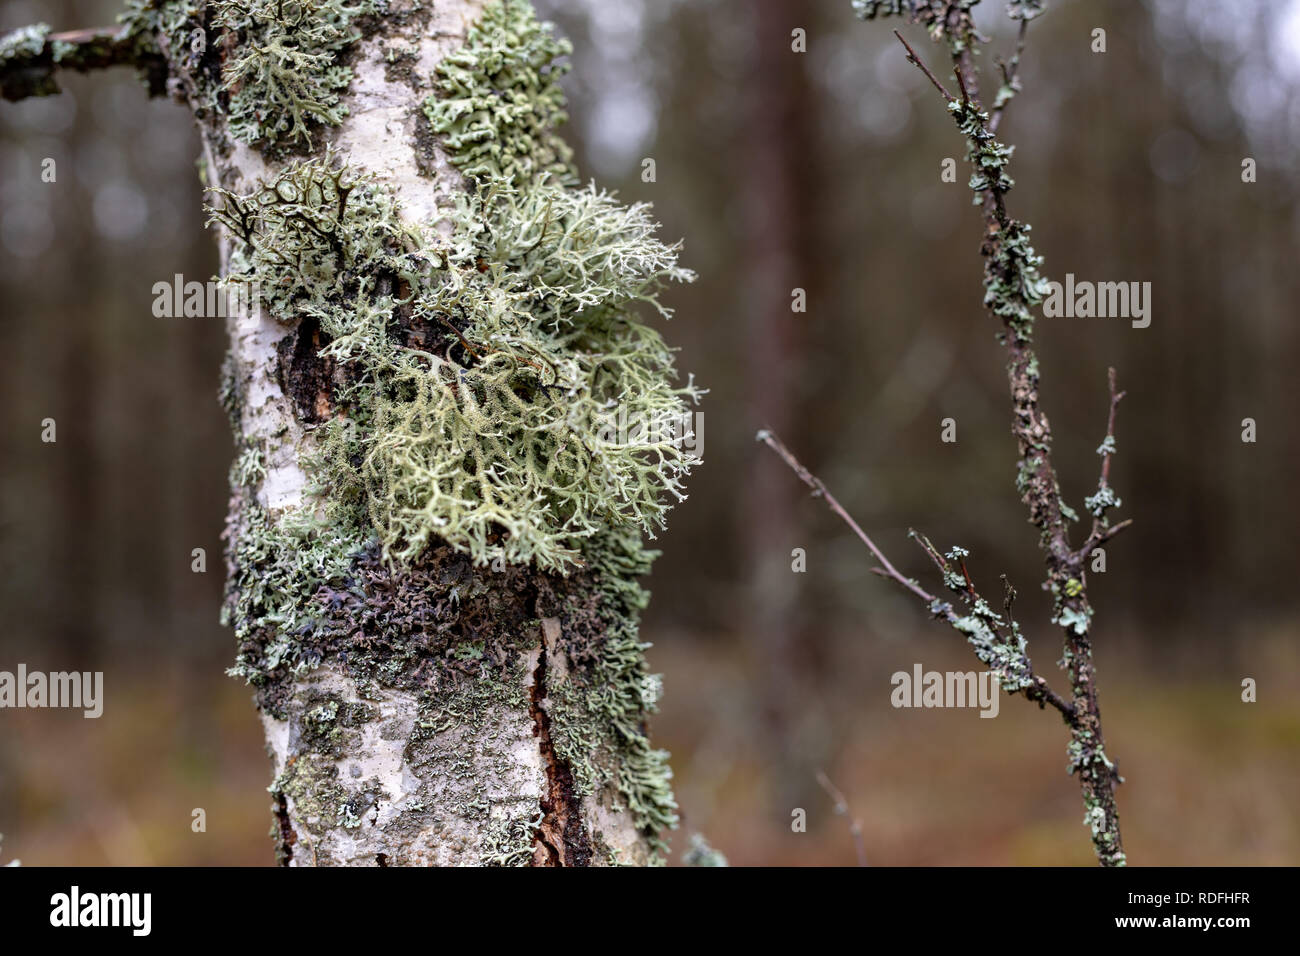 Moss and grew on the bark of birches. The bark of a birch tree. Season winter. Stock Photo